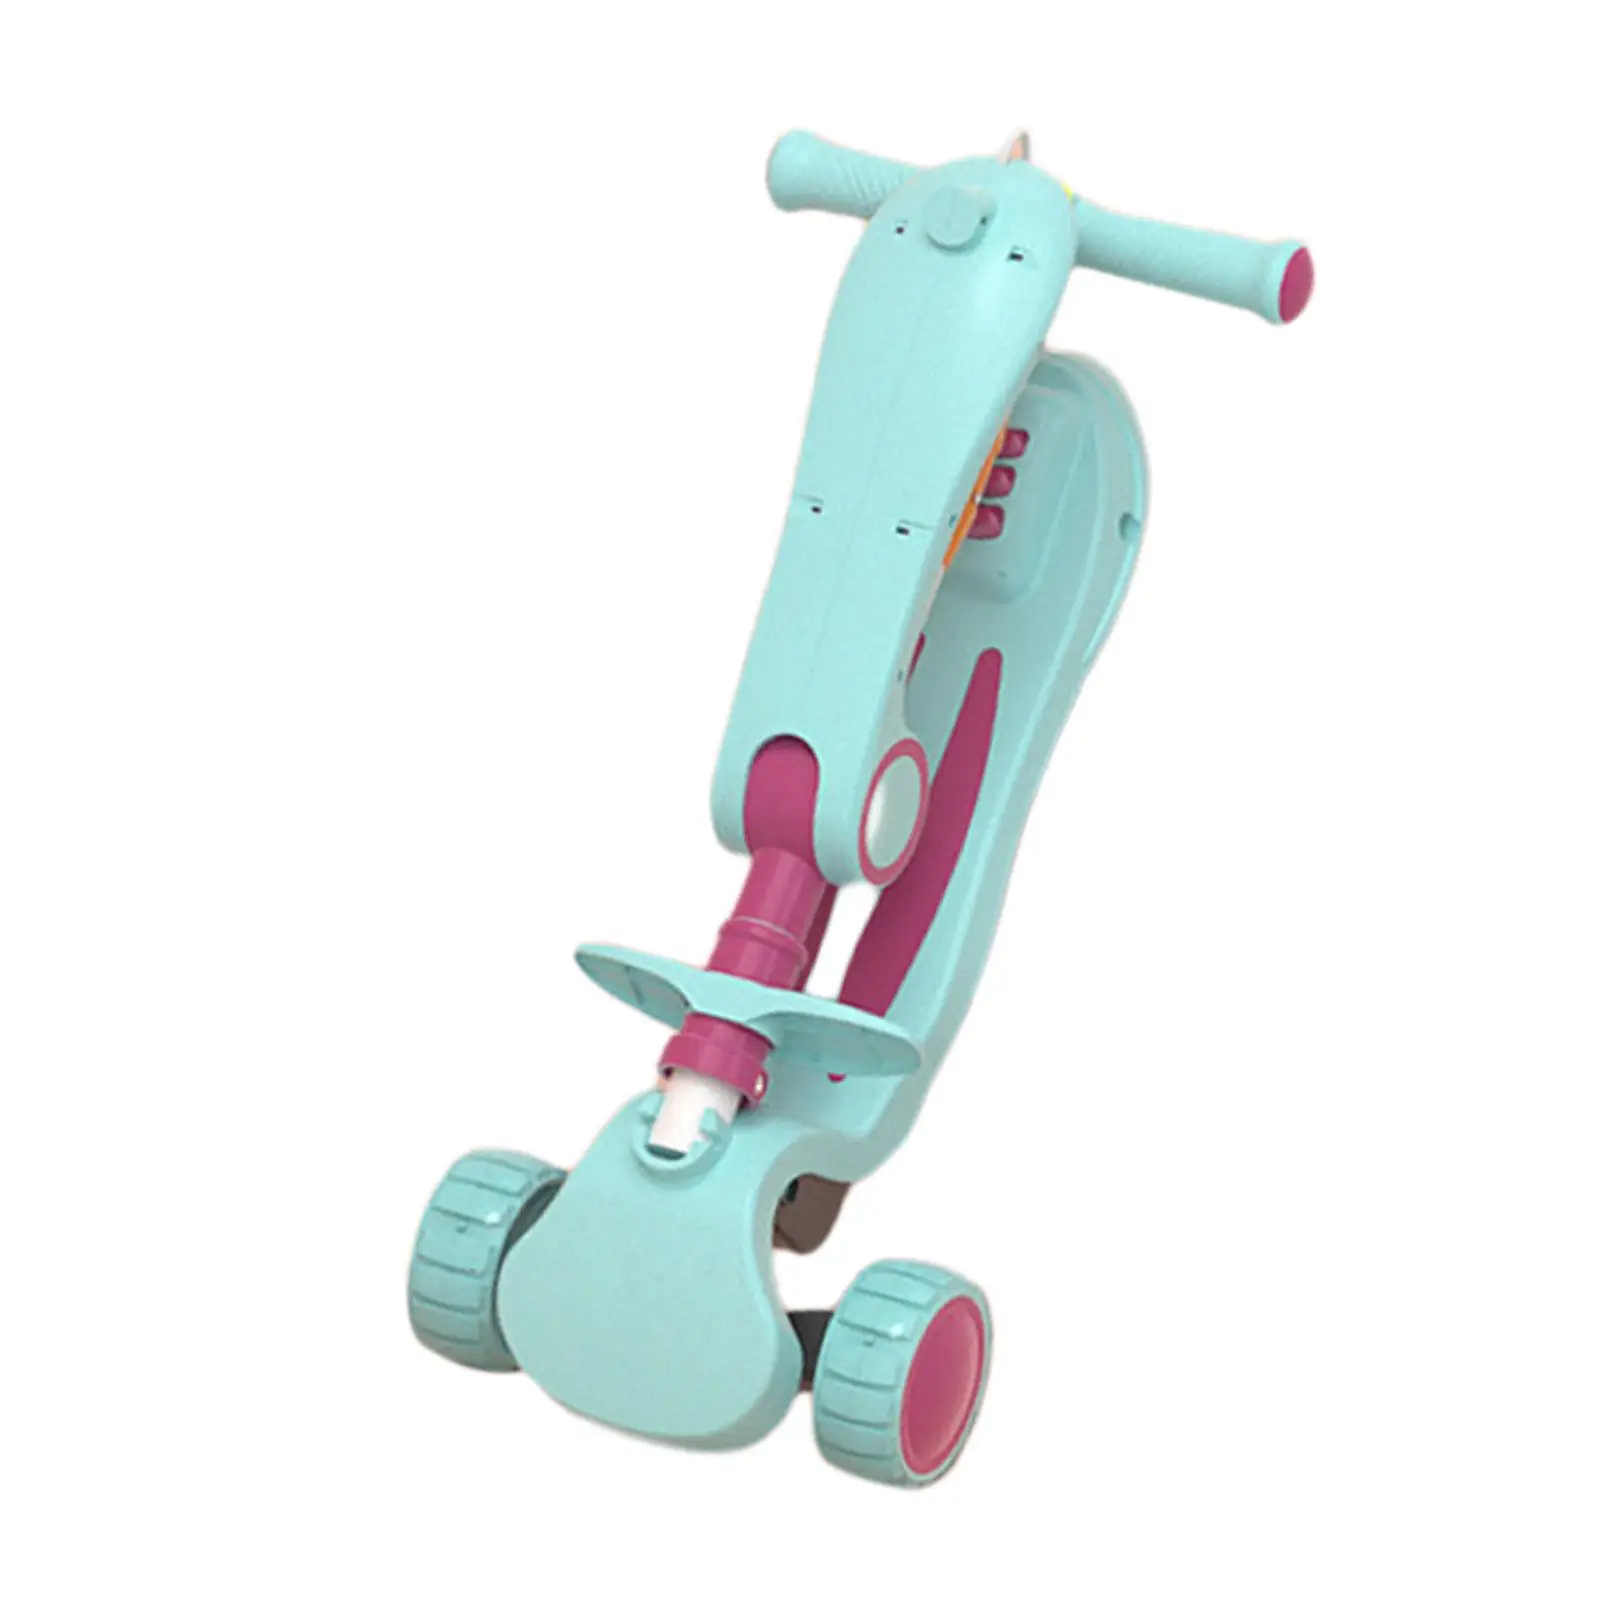 Self Balancing Kids Toys 4 Level Adjustable Height Triangular Structure Folding Flashing Kids Scooter for Activity Playing Yard